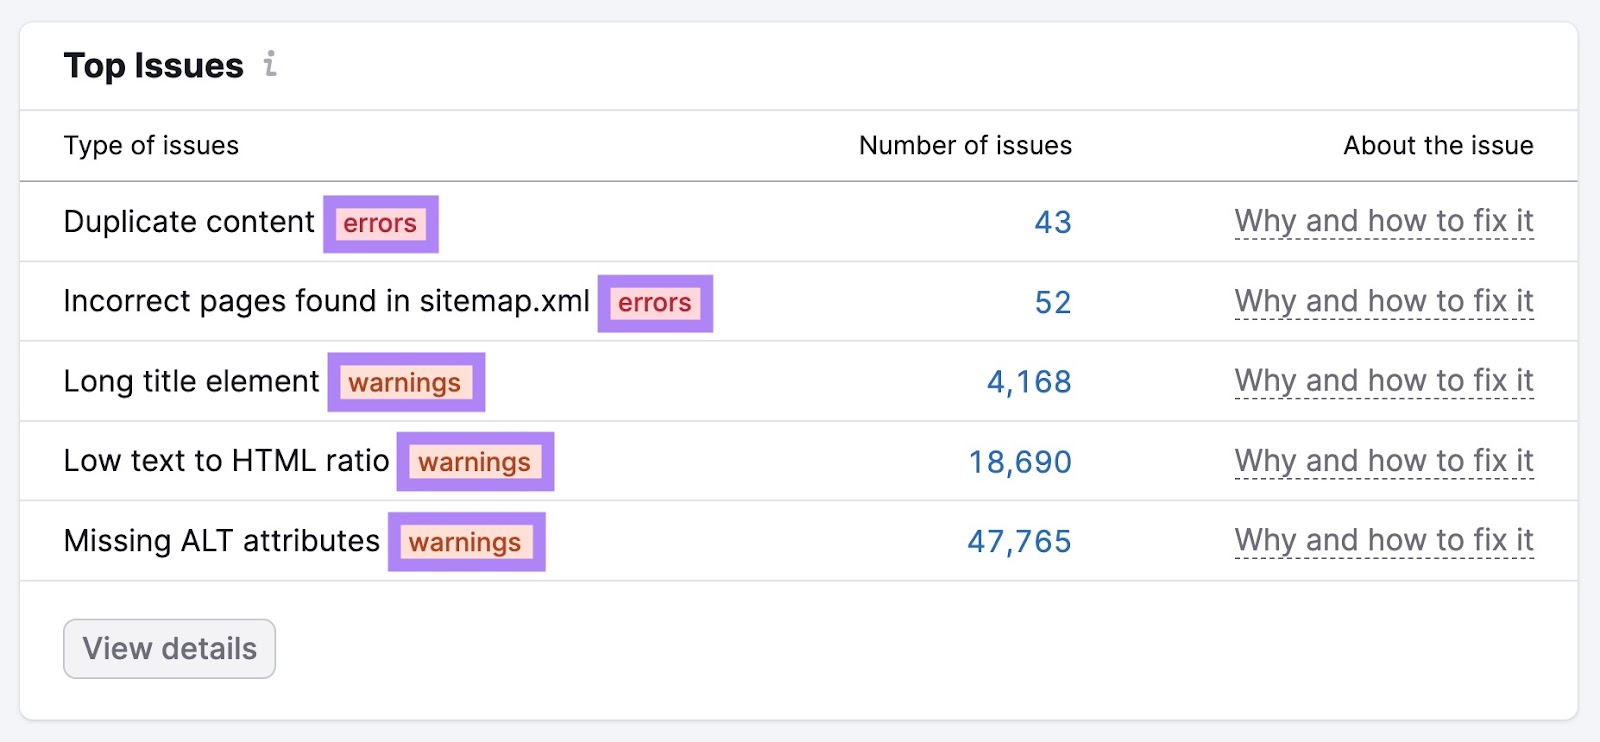 "Top Issues" on Semrush's "Site Audit" including duplicate content, missing ALT attributes, low text to HTML ratio, etc.